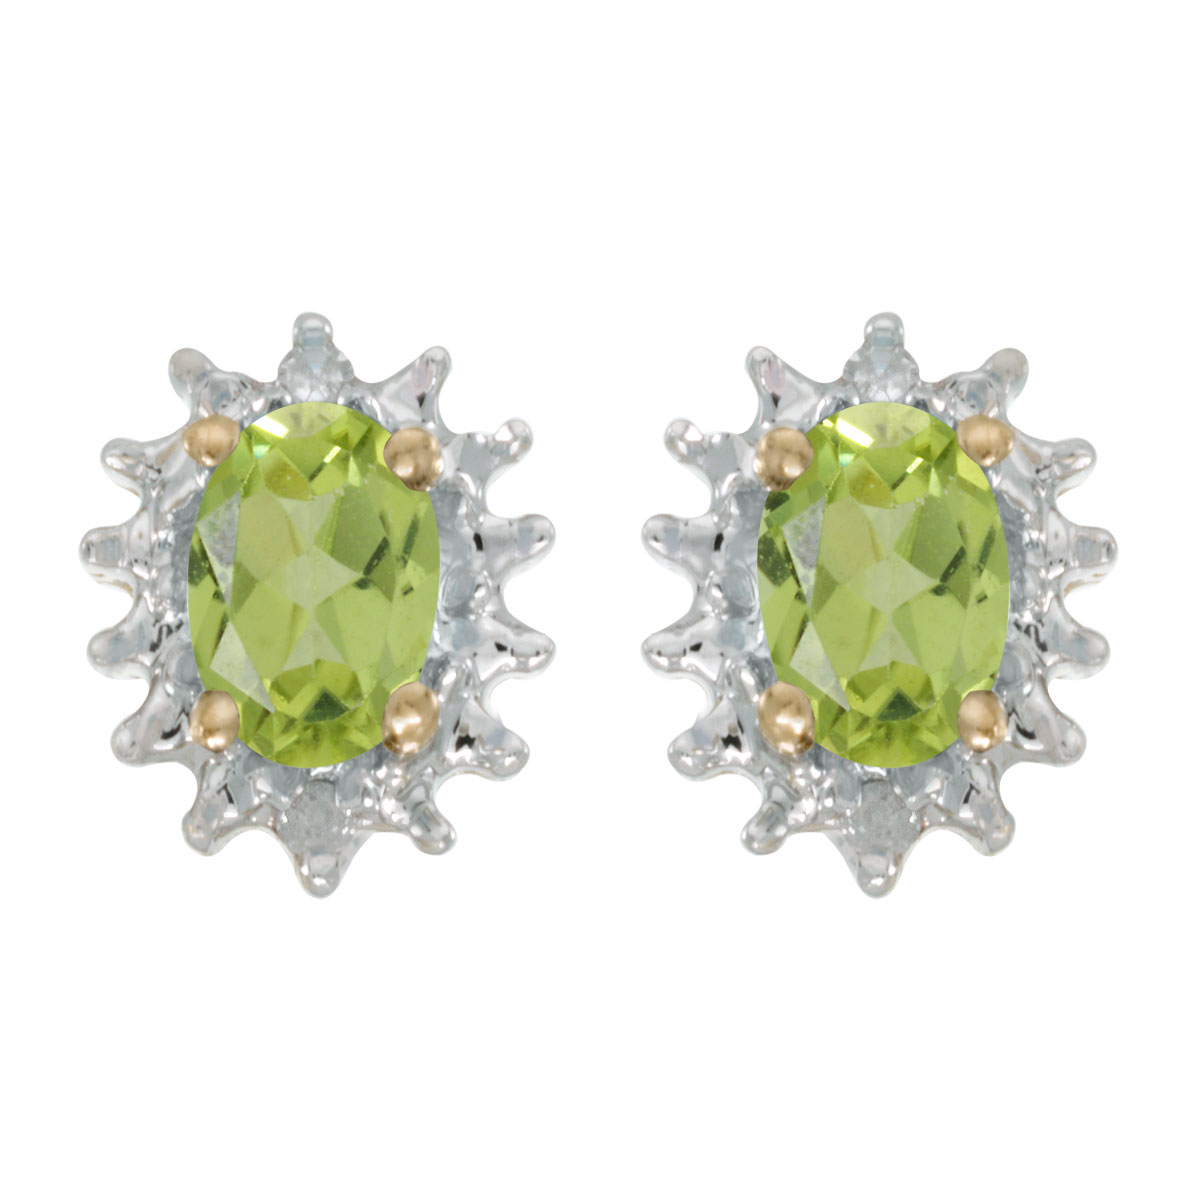 JCX1995: These 14k yellow gold oval peridot and diamond earrings feature 6x4 mm genuine natural peridots with a 0.80 ct total weight and .04 ct diamonds.